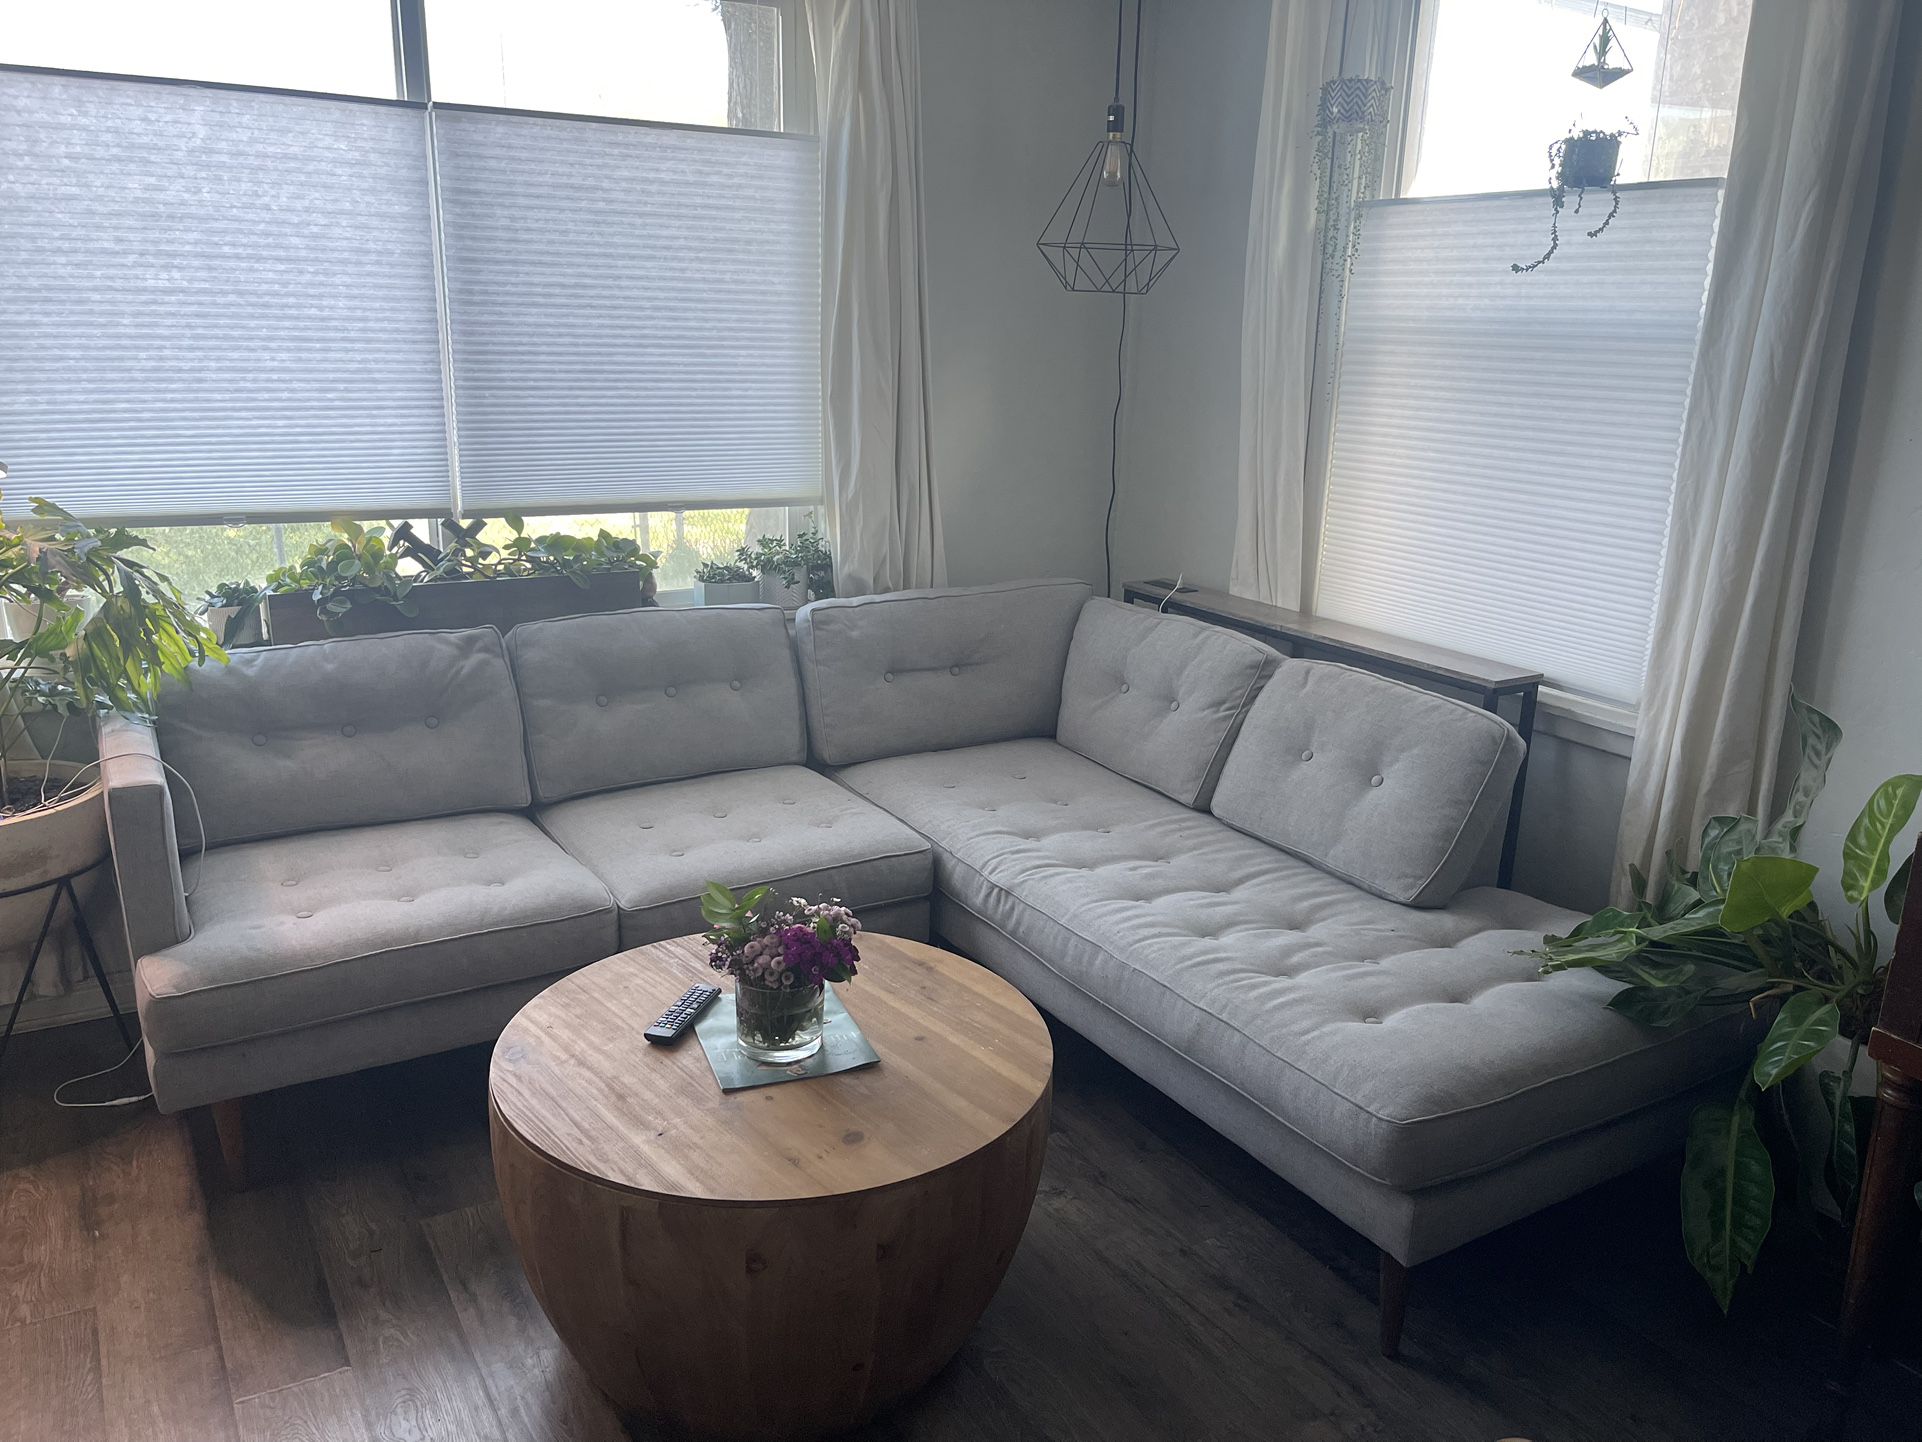 West Elm Sofa With Bumper Chaise